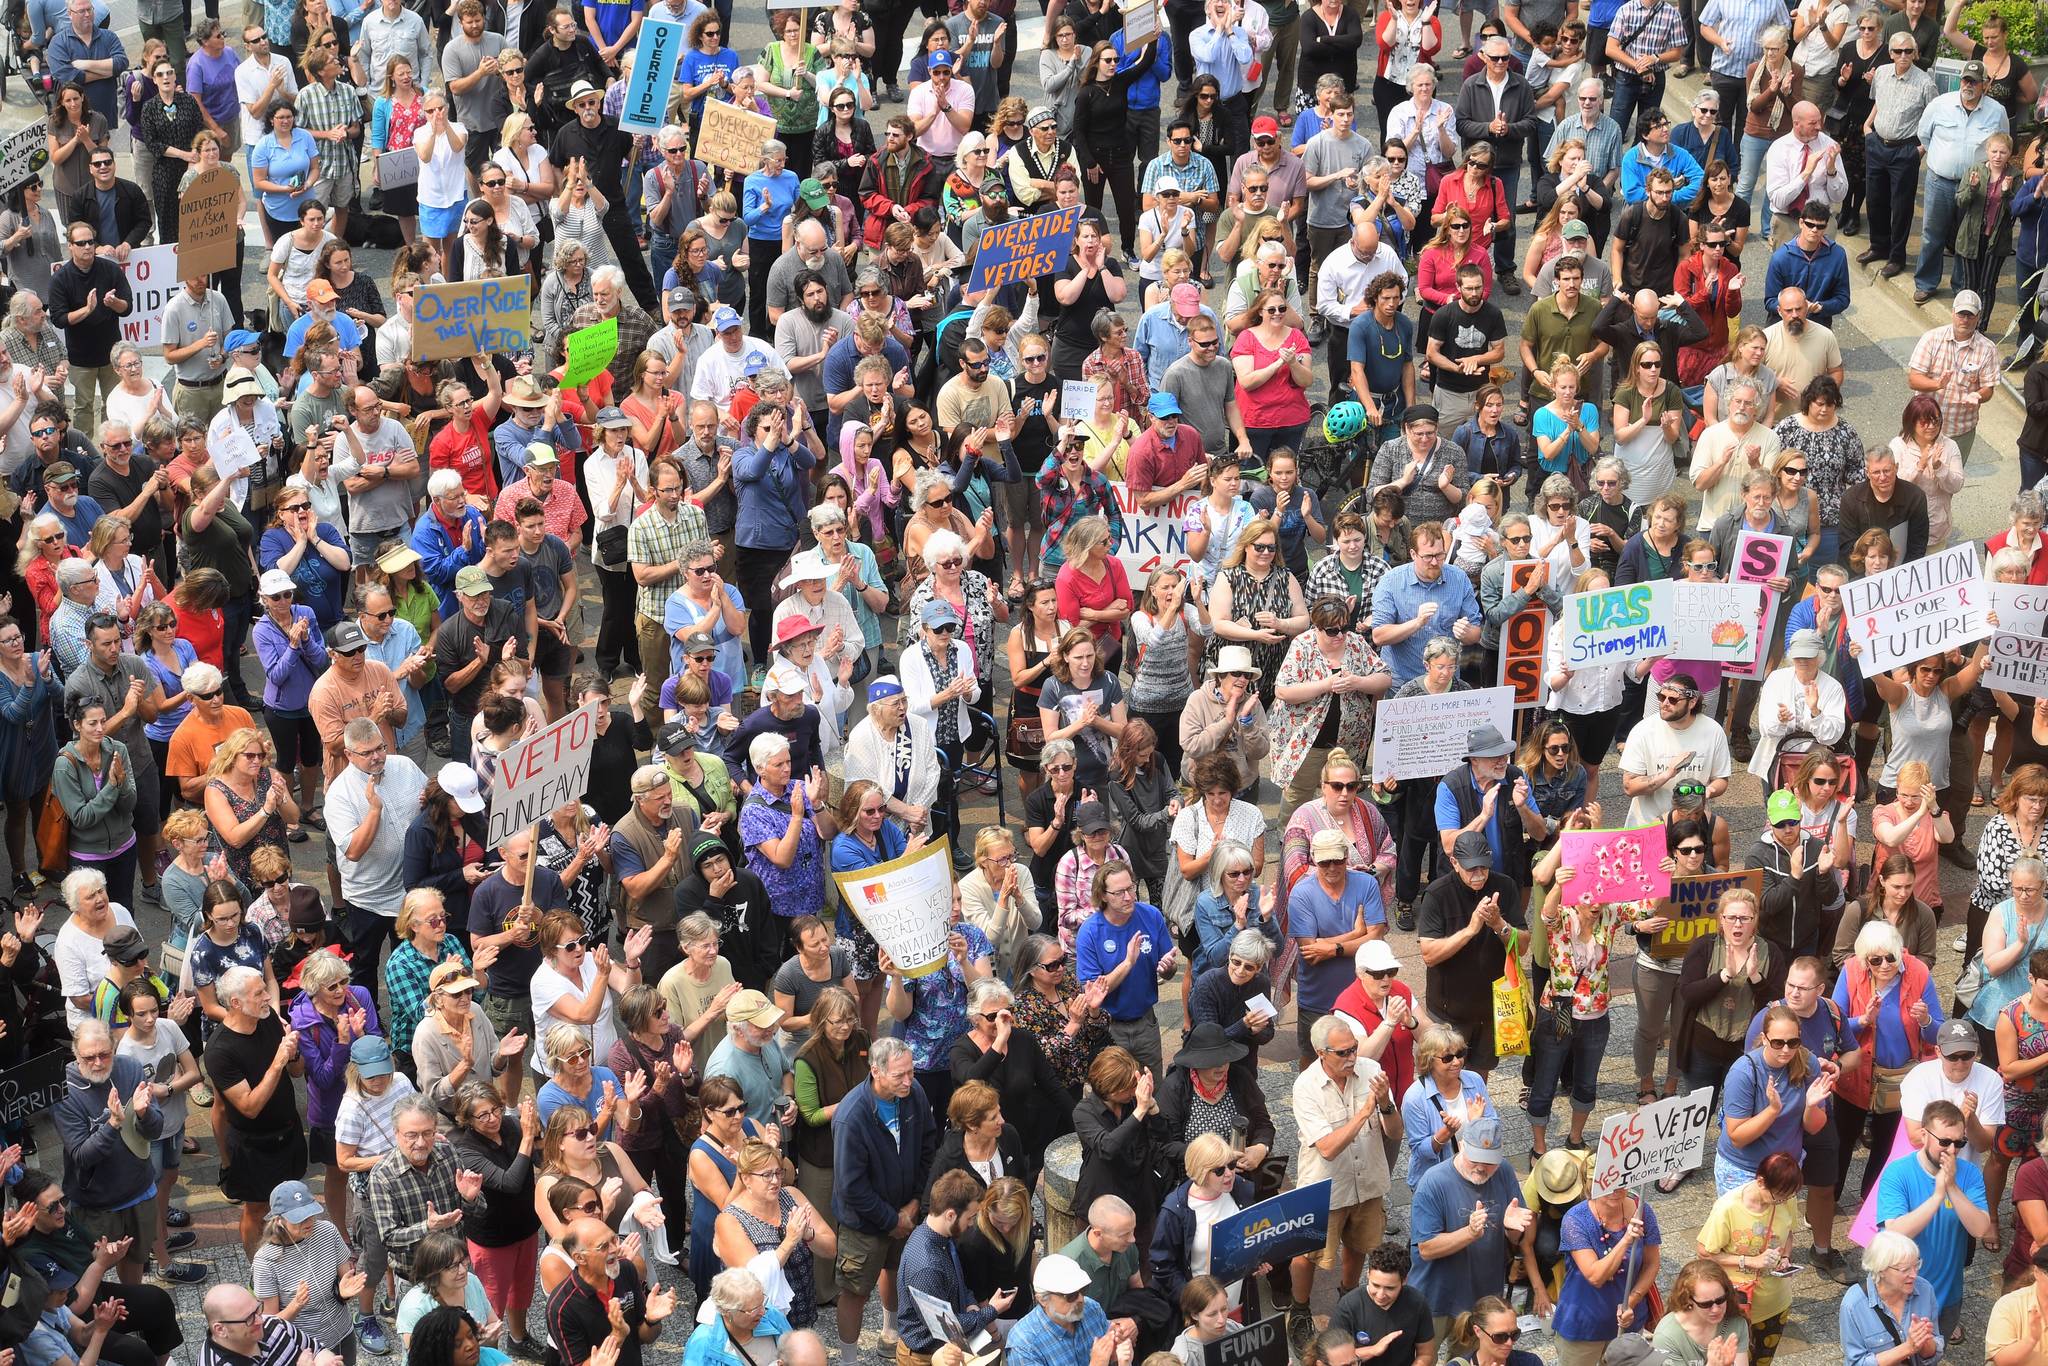 Hundreds attend a rally in front of the Capitol calling for for an override of Gov. Mike Dunleavy’s budget vetoes on Monday, July 8, 2019. (Michael Penn | Juneau Empire)